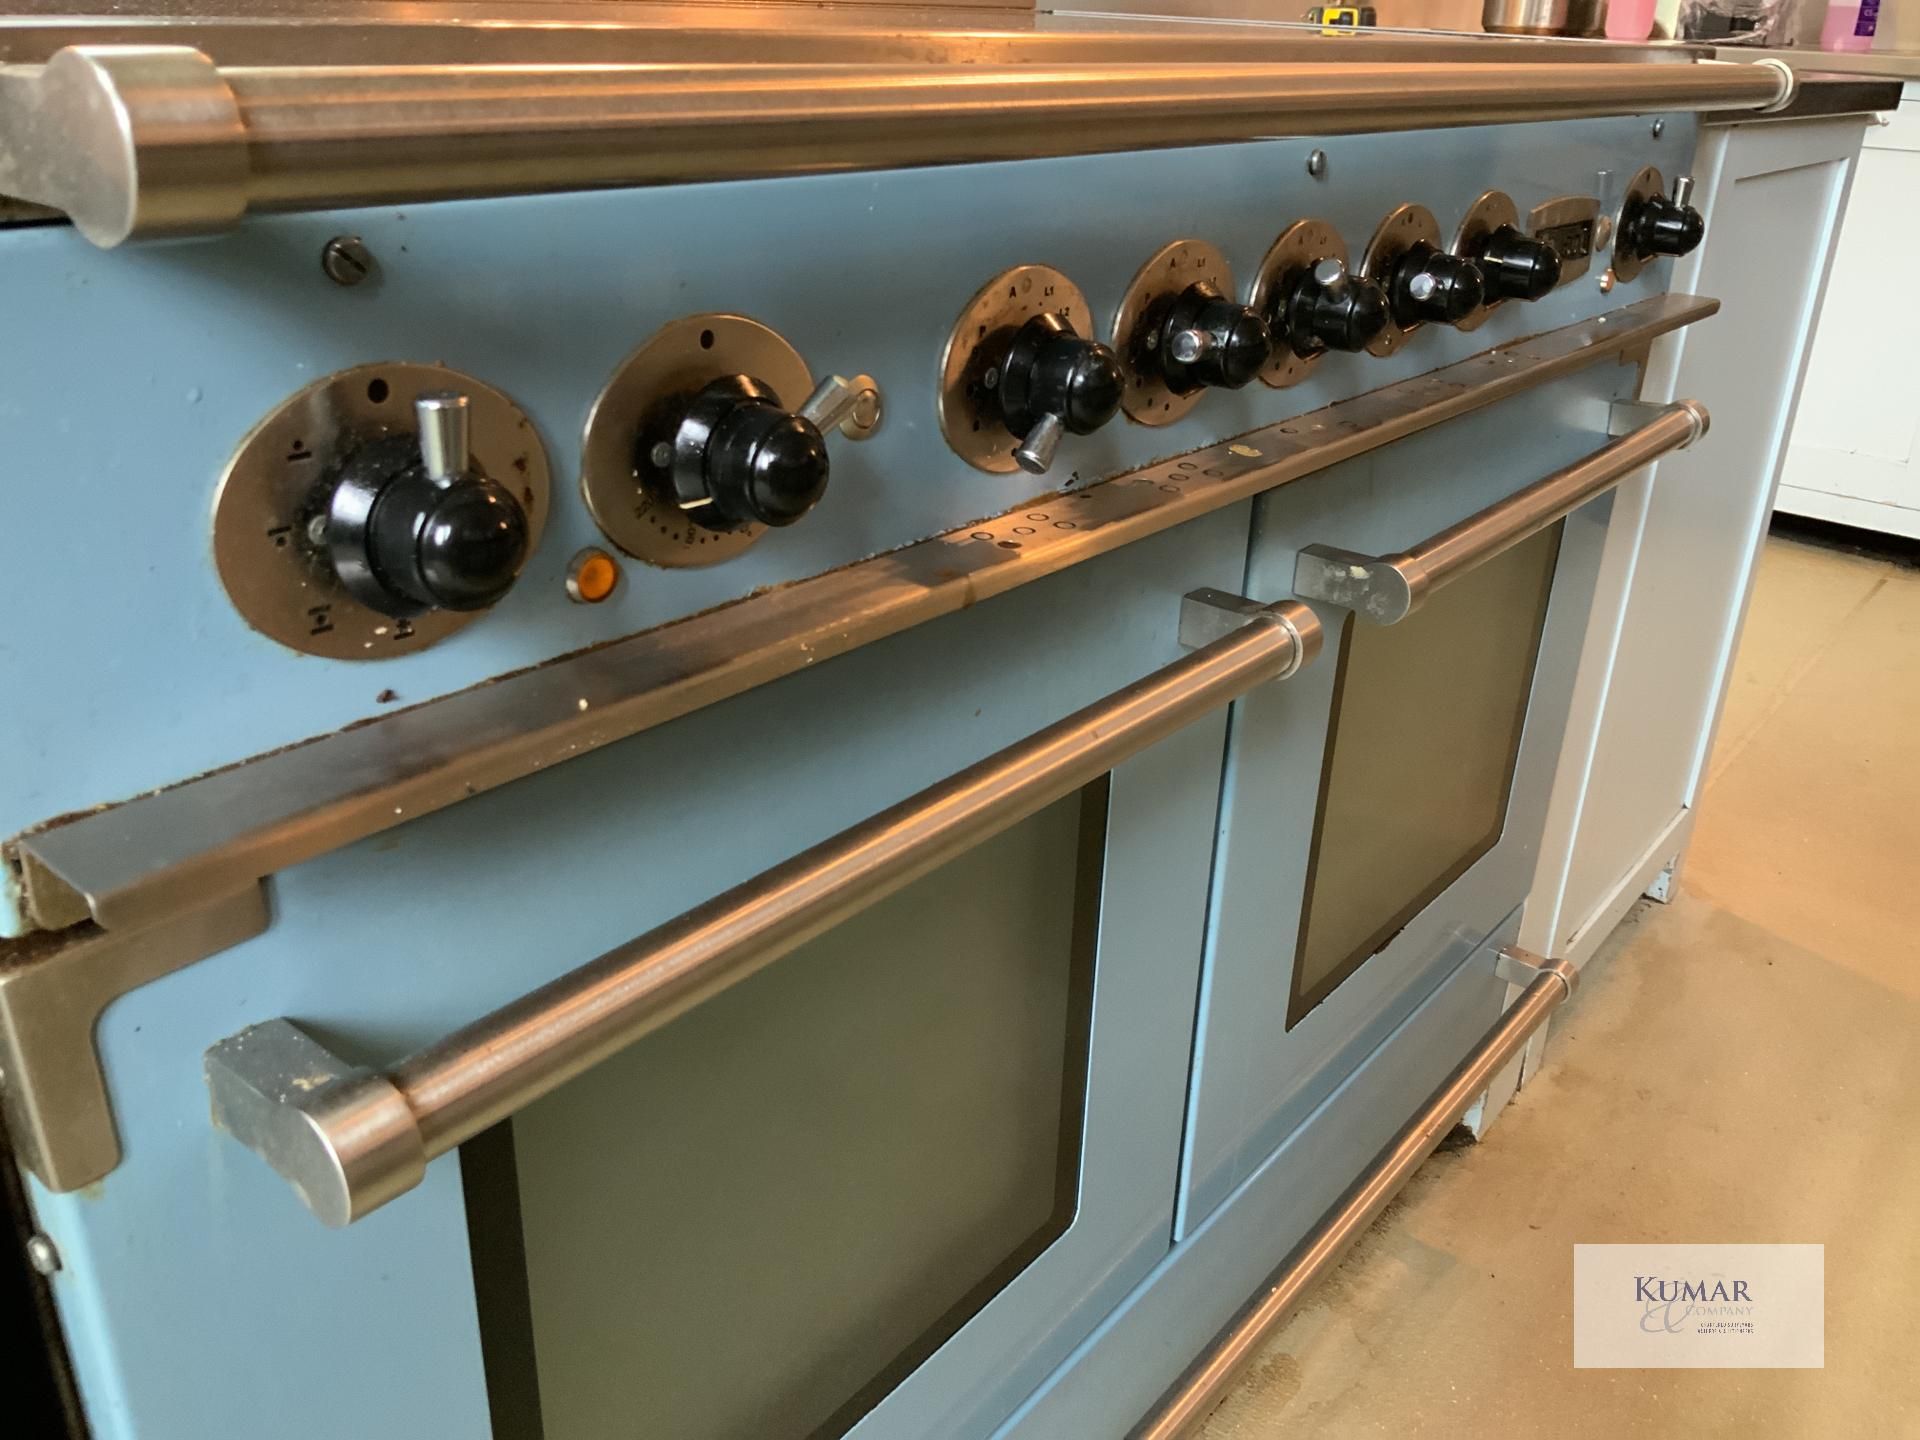 China Blue Aga Rangemaster Falcon Continental 1092 Range Cookers with Twin Ovens & 5 Position - Image 4 of 10